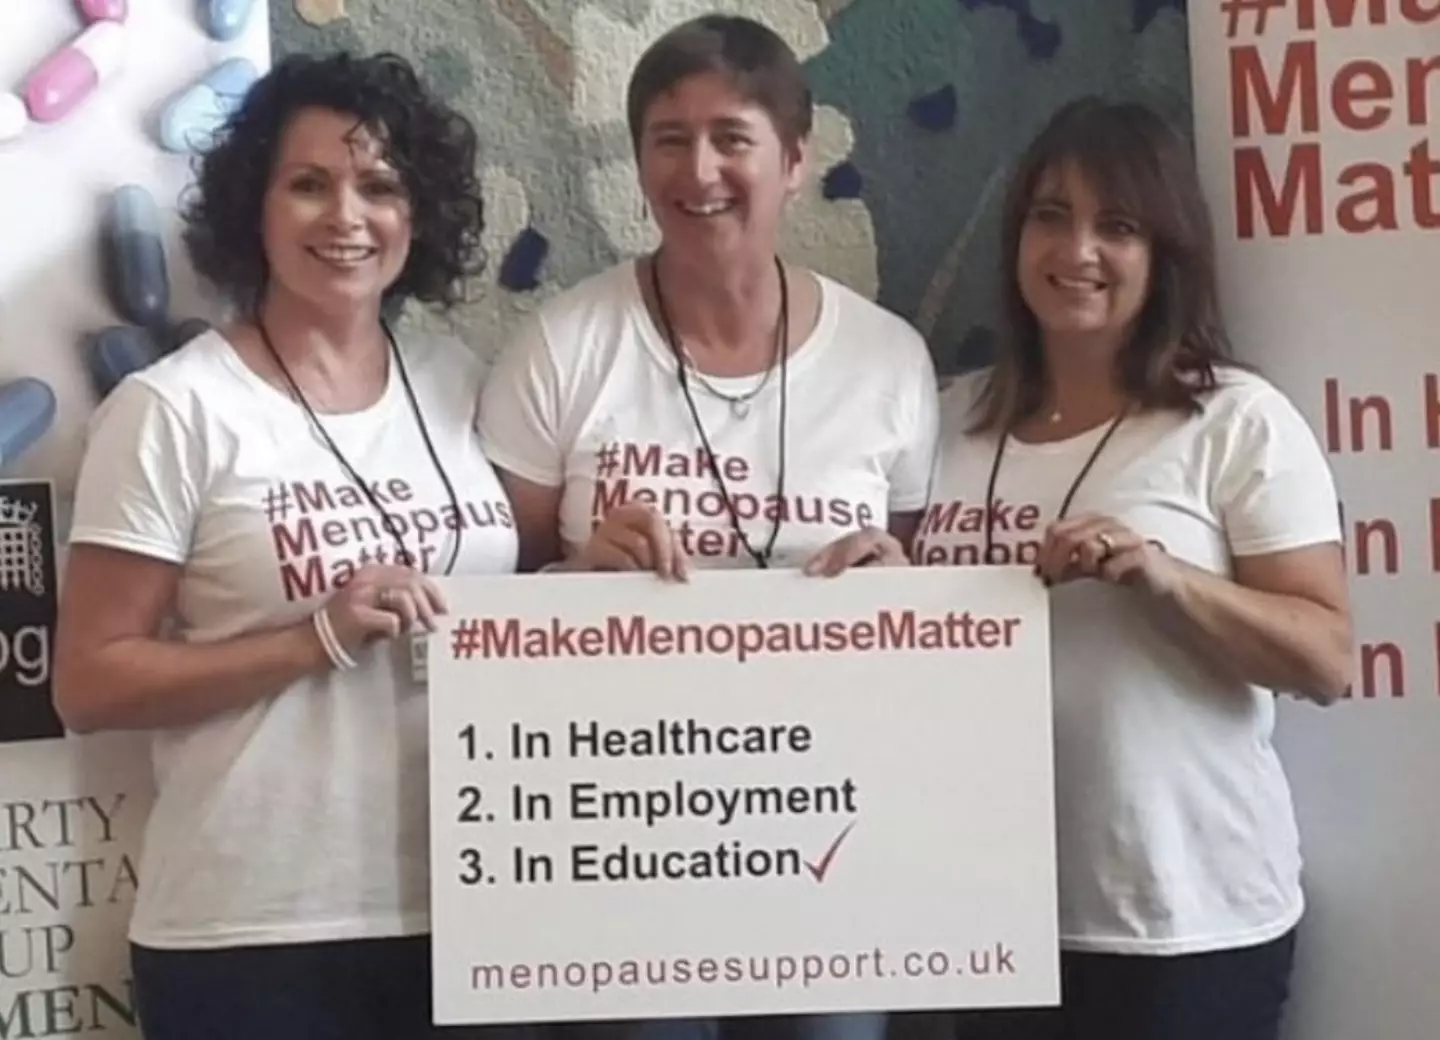 Katie and her colleagues campaign for better support.